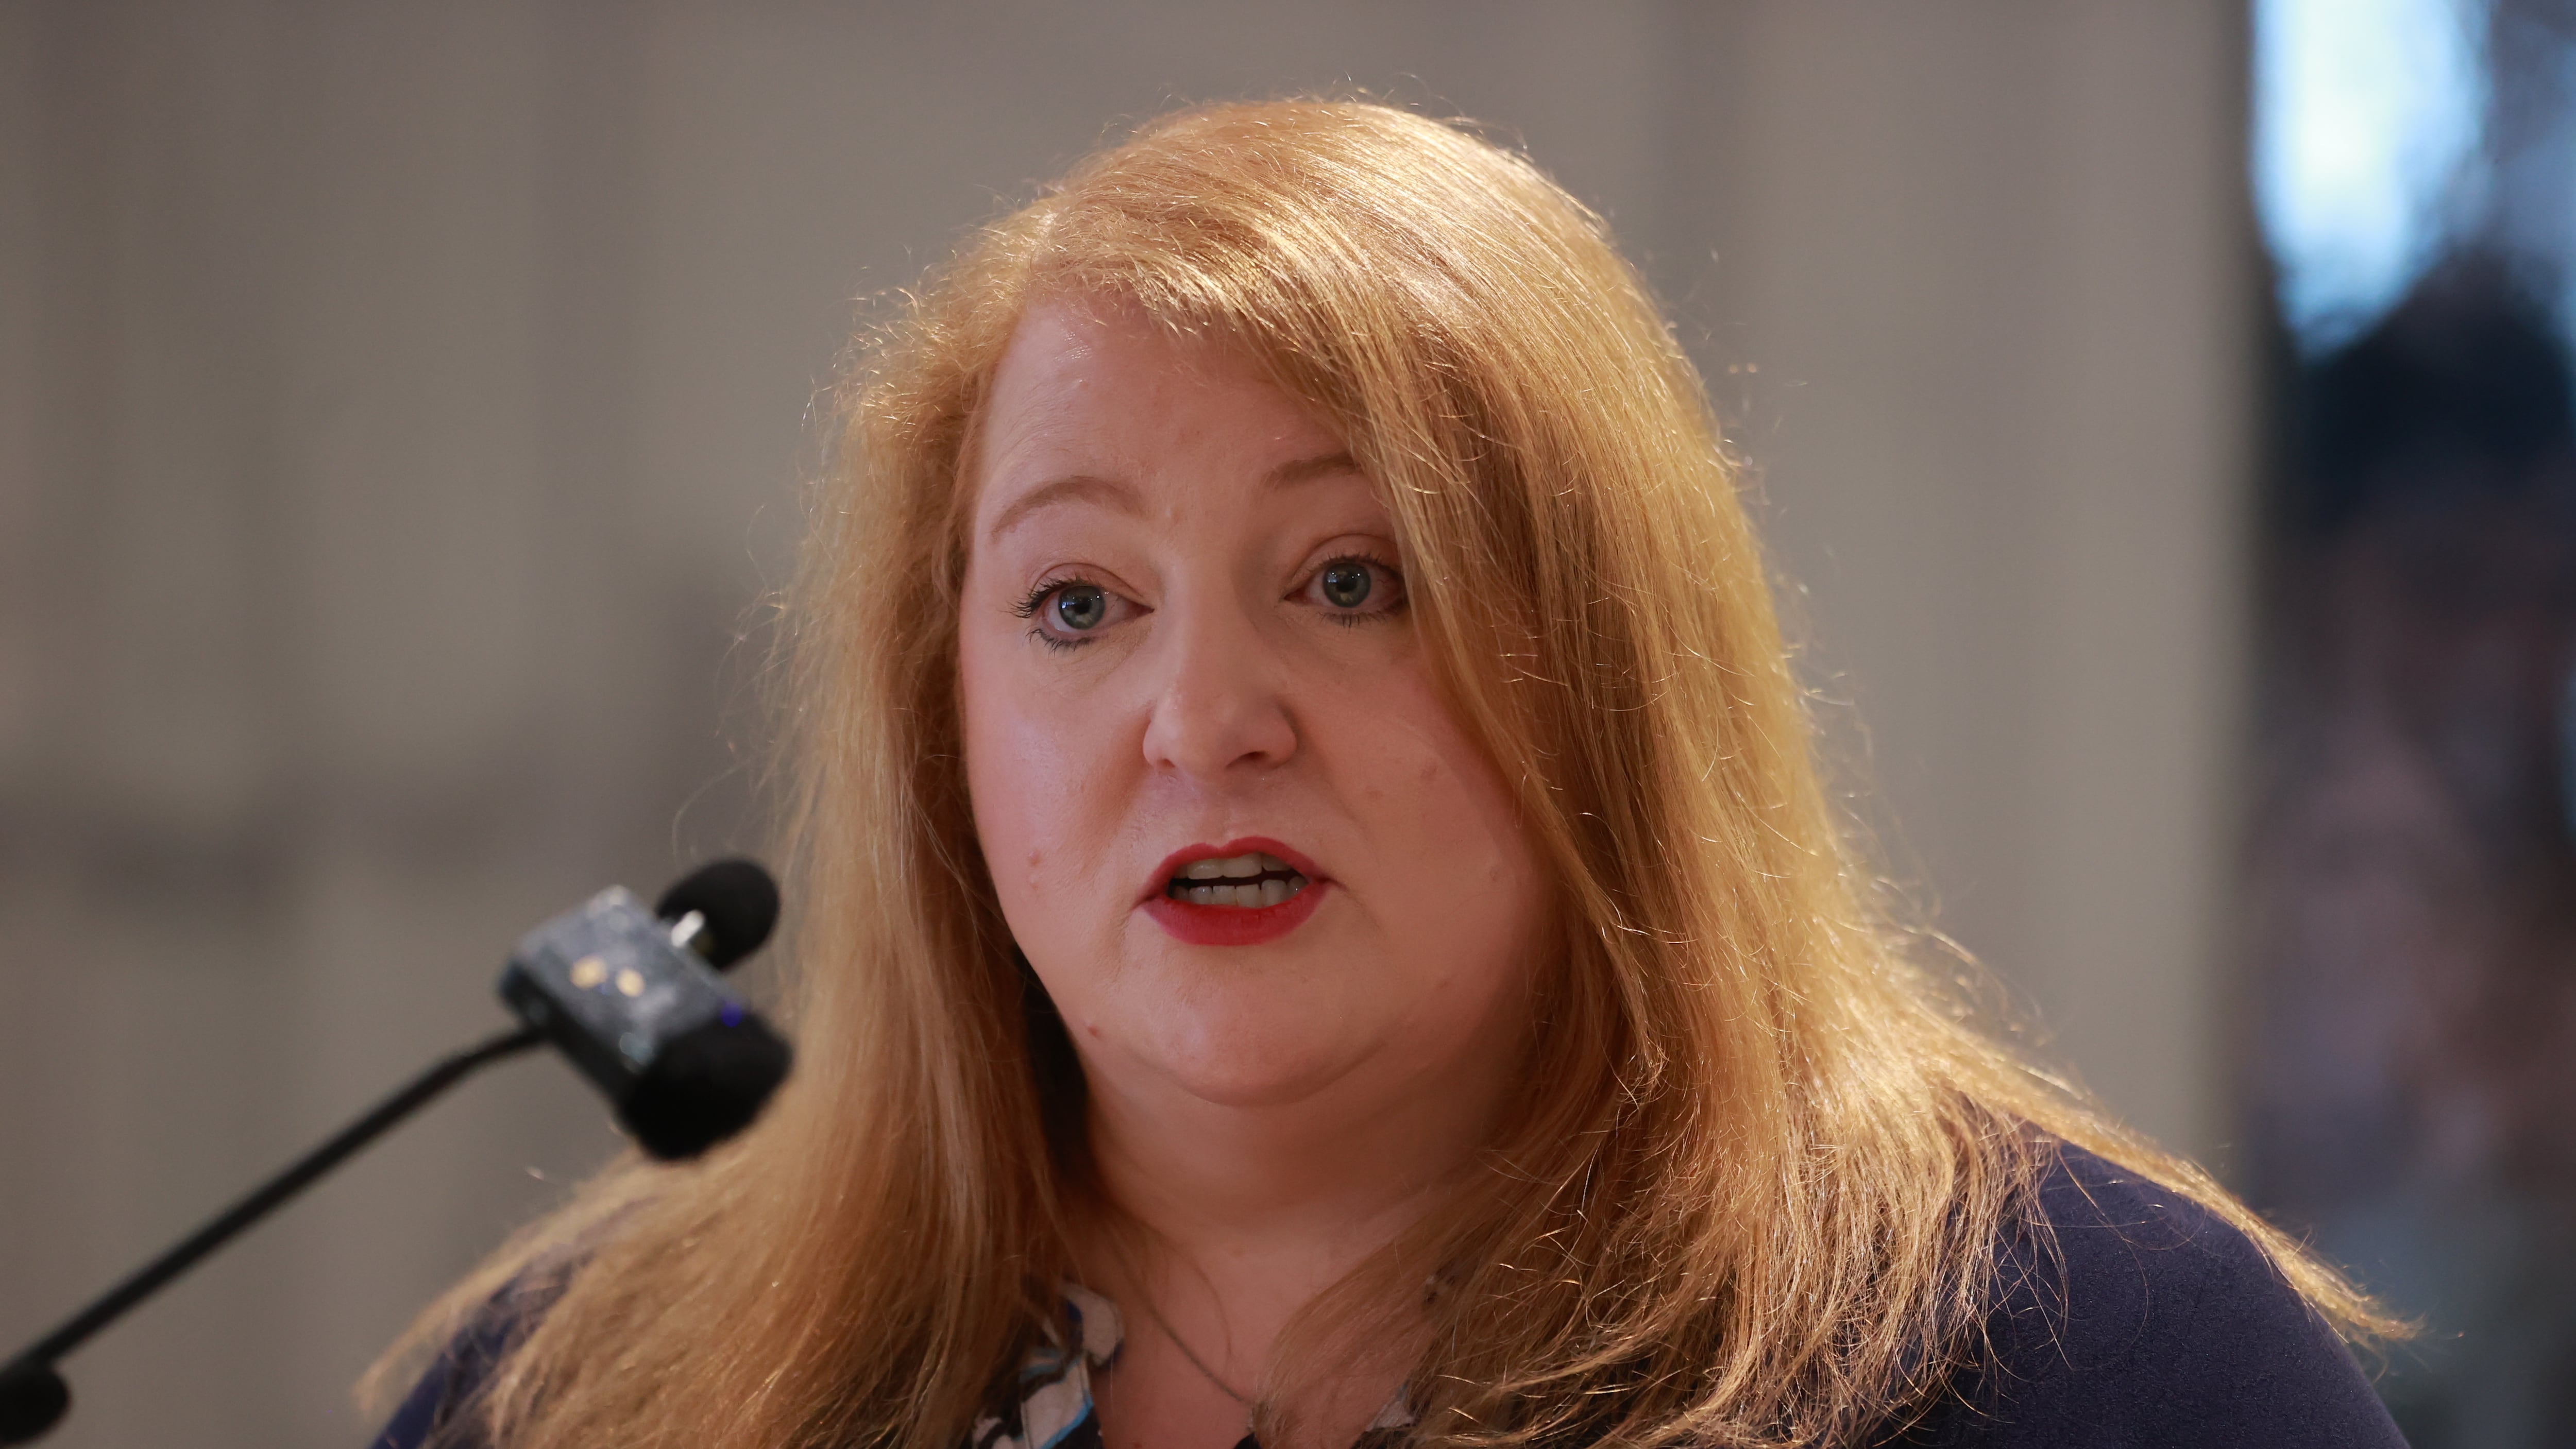 Justice Minister Naomi Long said a decision has not been finalised on an appeal against a High Court ruling over the Sexual Offences and Trafficking Victims Act